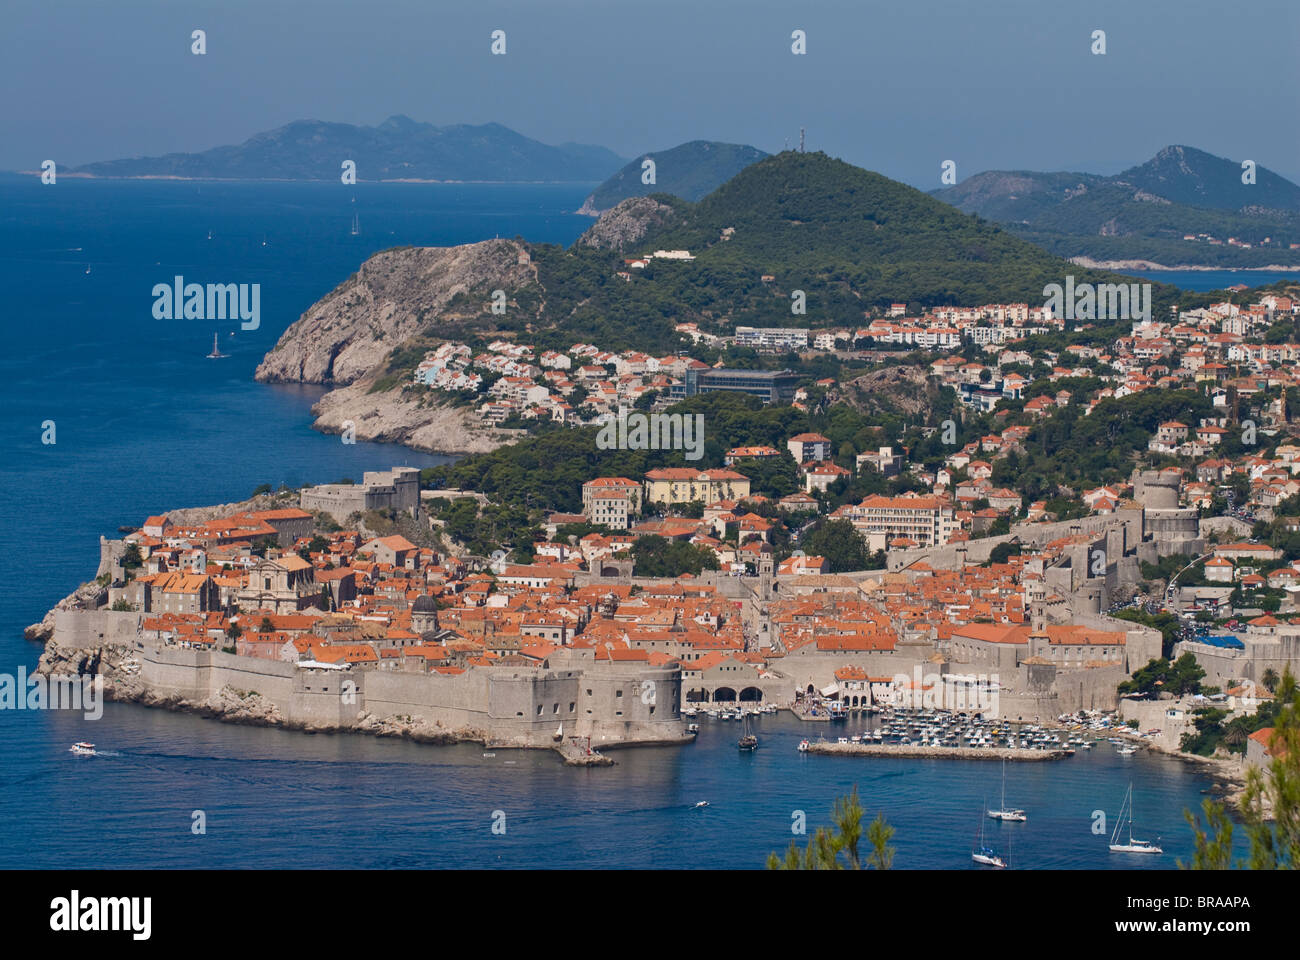 View over the old town of Dubrovnik, UNESCO World Heritage Site, Croatia, Europe Stock Photo